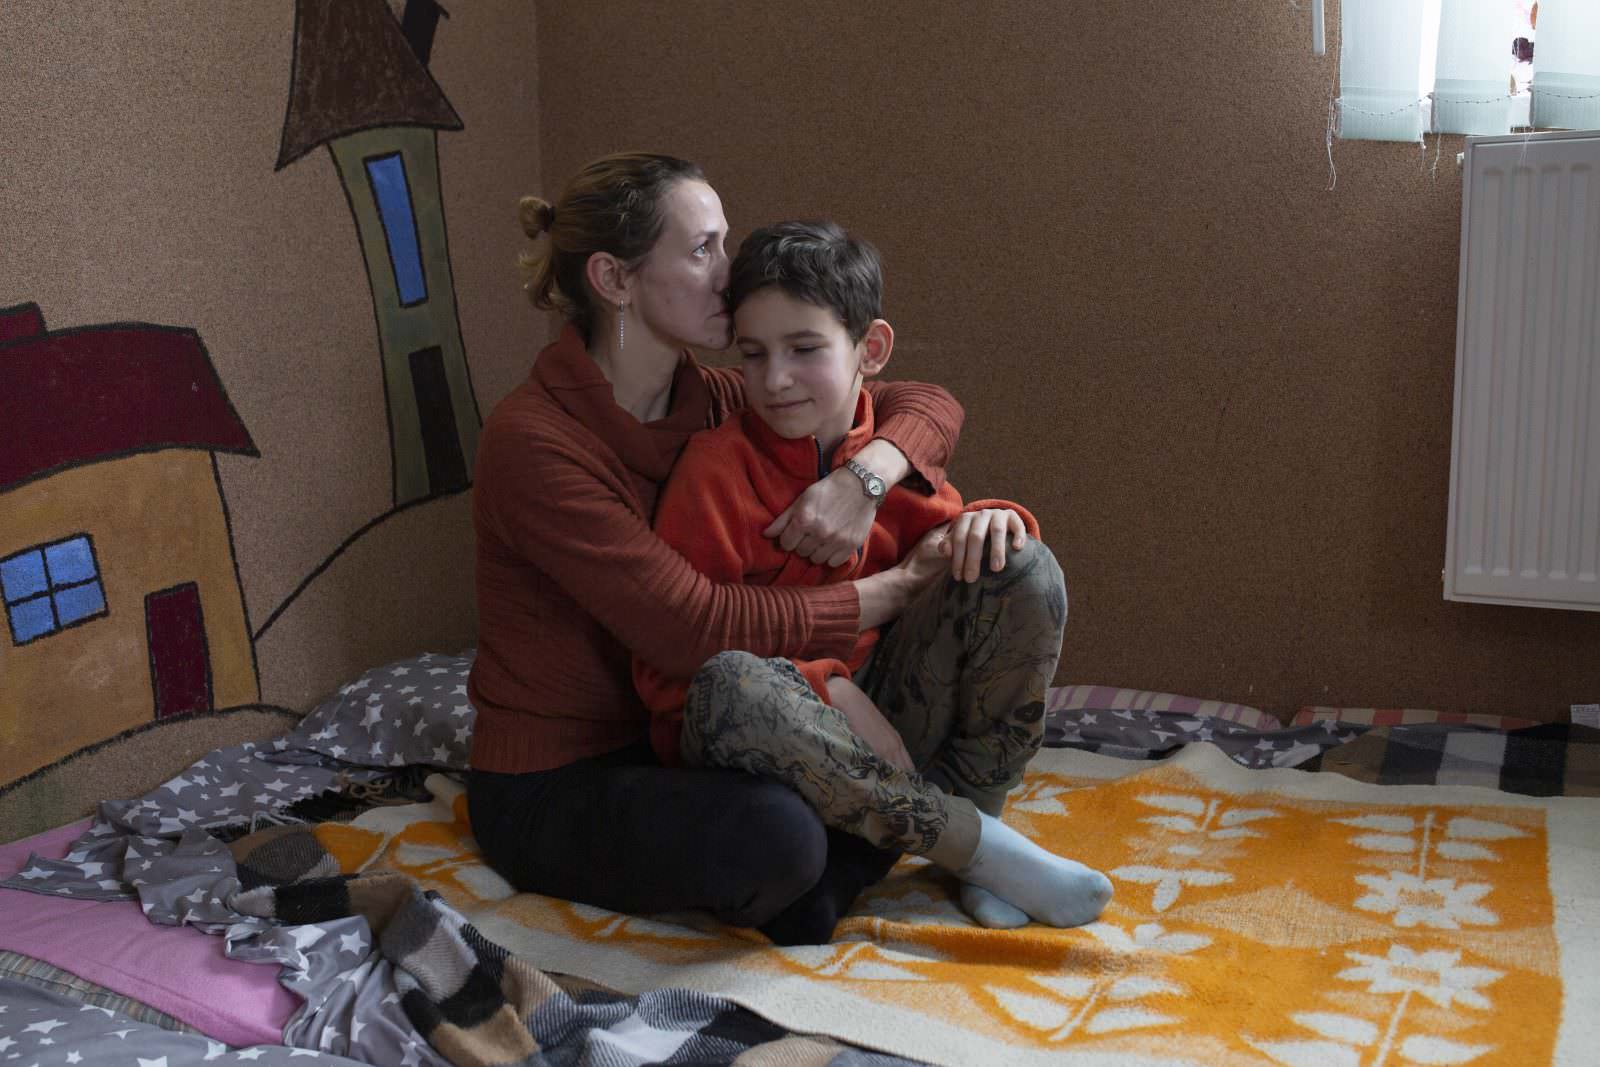 Natasha, 38, and her son Misha, 10, fled from Kyiv to Lviv in western Ukraine where they have been staying in the Seventh Day Adventist Church. Natasha’s husband is still in the Ukrainian capital. They have no relatives or friends abroad but hope to reach Poland or Germany. ; Since 24 February, an estimated 4.5 million people have been forcibly displaced by the crisis in Ukraine. These include 2.5 million refugees who have fled to other countries and almost 2 million people internally displaced. The inter-agency Ukraine Protection Cluster reports that the largest numbers of internally displaced people are in the regions of Zakarpattya (500,000), Lvivska (390,000) and Volynska (170,000) in the west and north-west of the country.